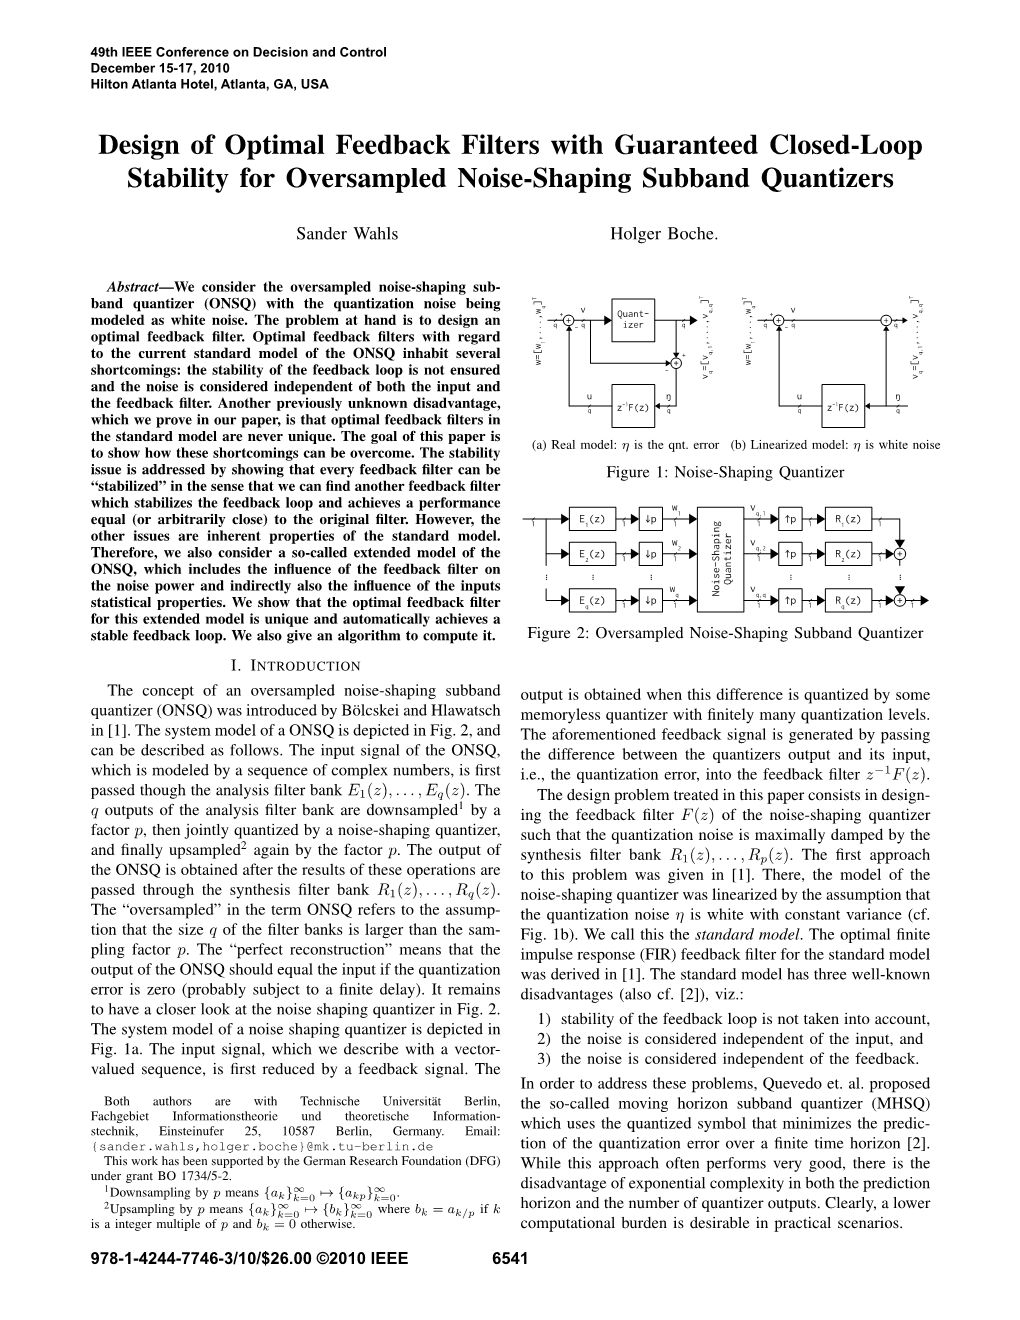 Design of Optimal Feedback Filters with Guaranteed Closed-Loop Stability for Oversampled Noise-Shaping Subband Quantizers